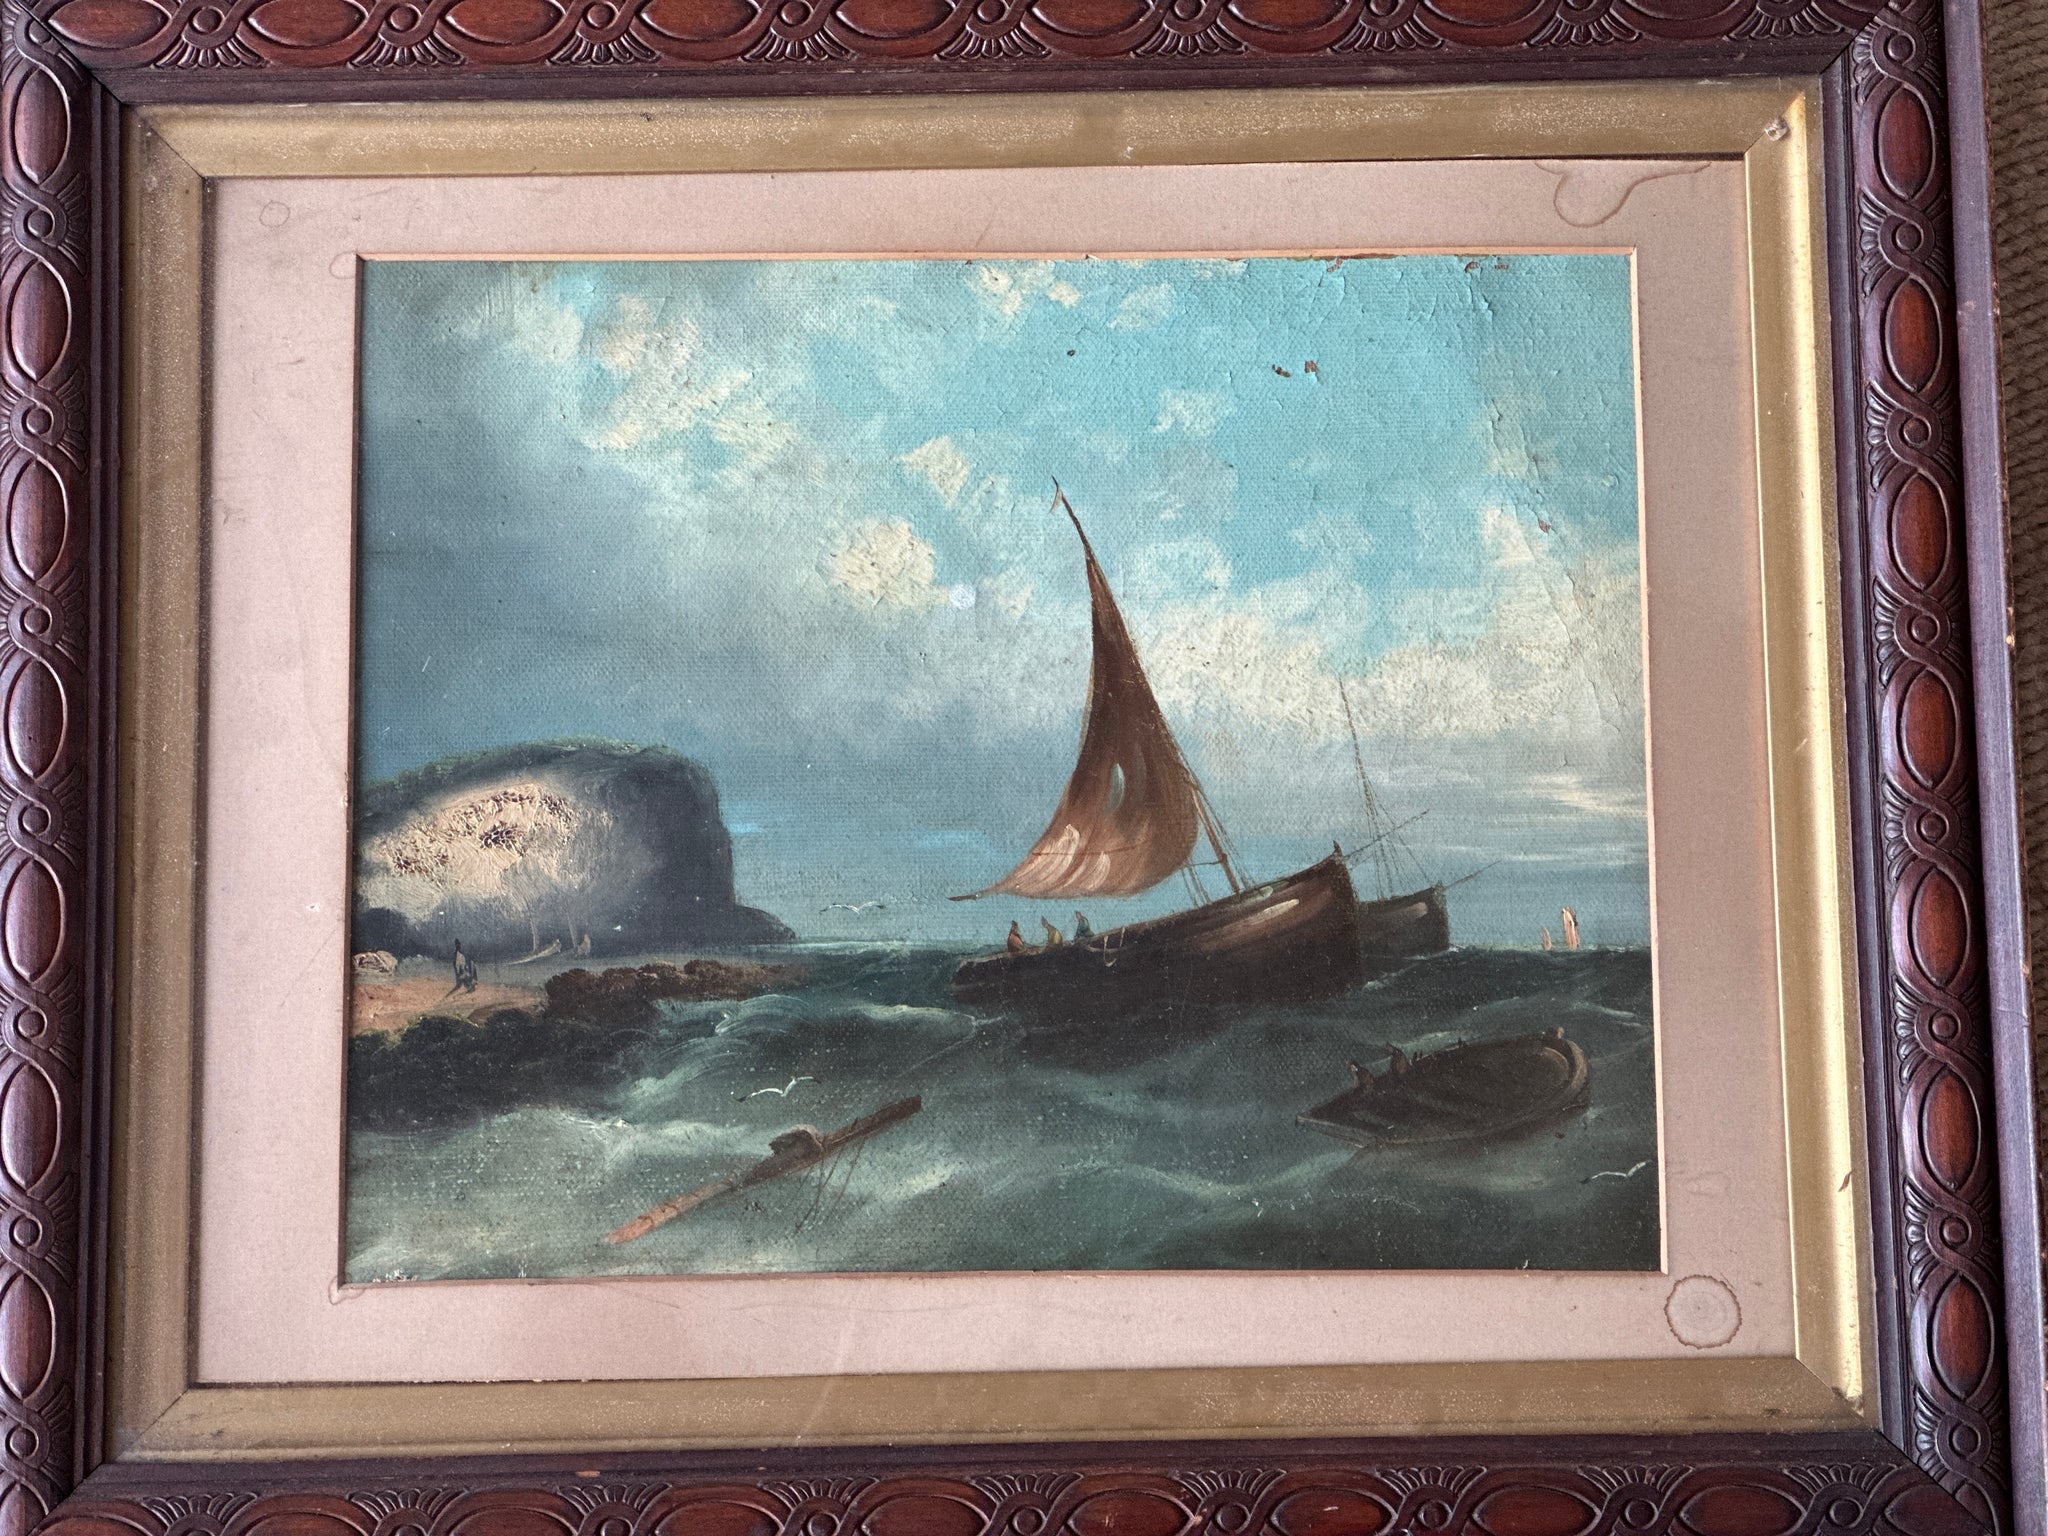 Oil on Canvas Sailing Scene in charming wooden frame